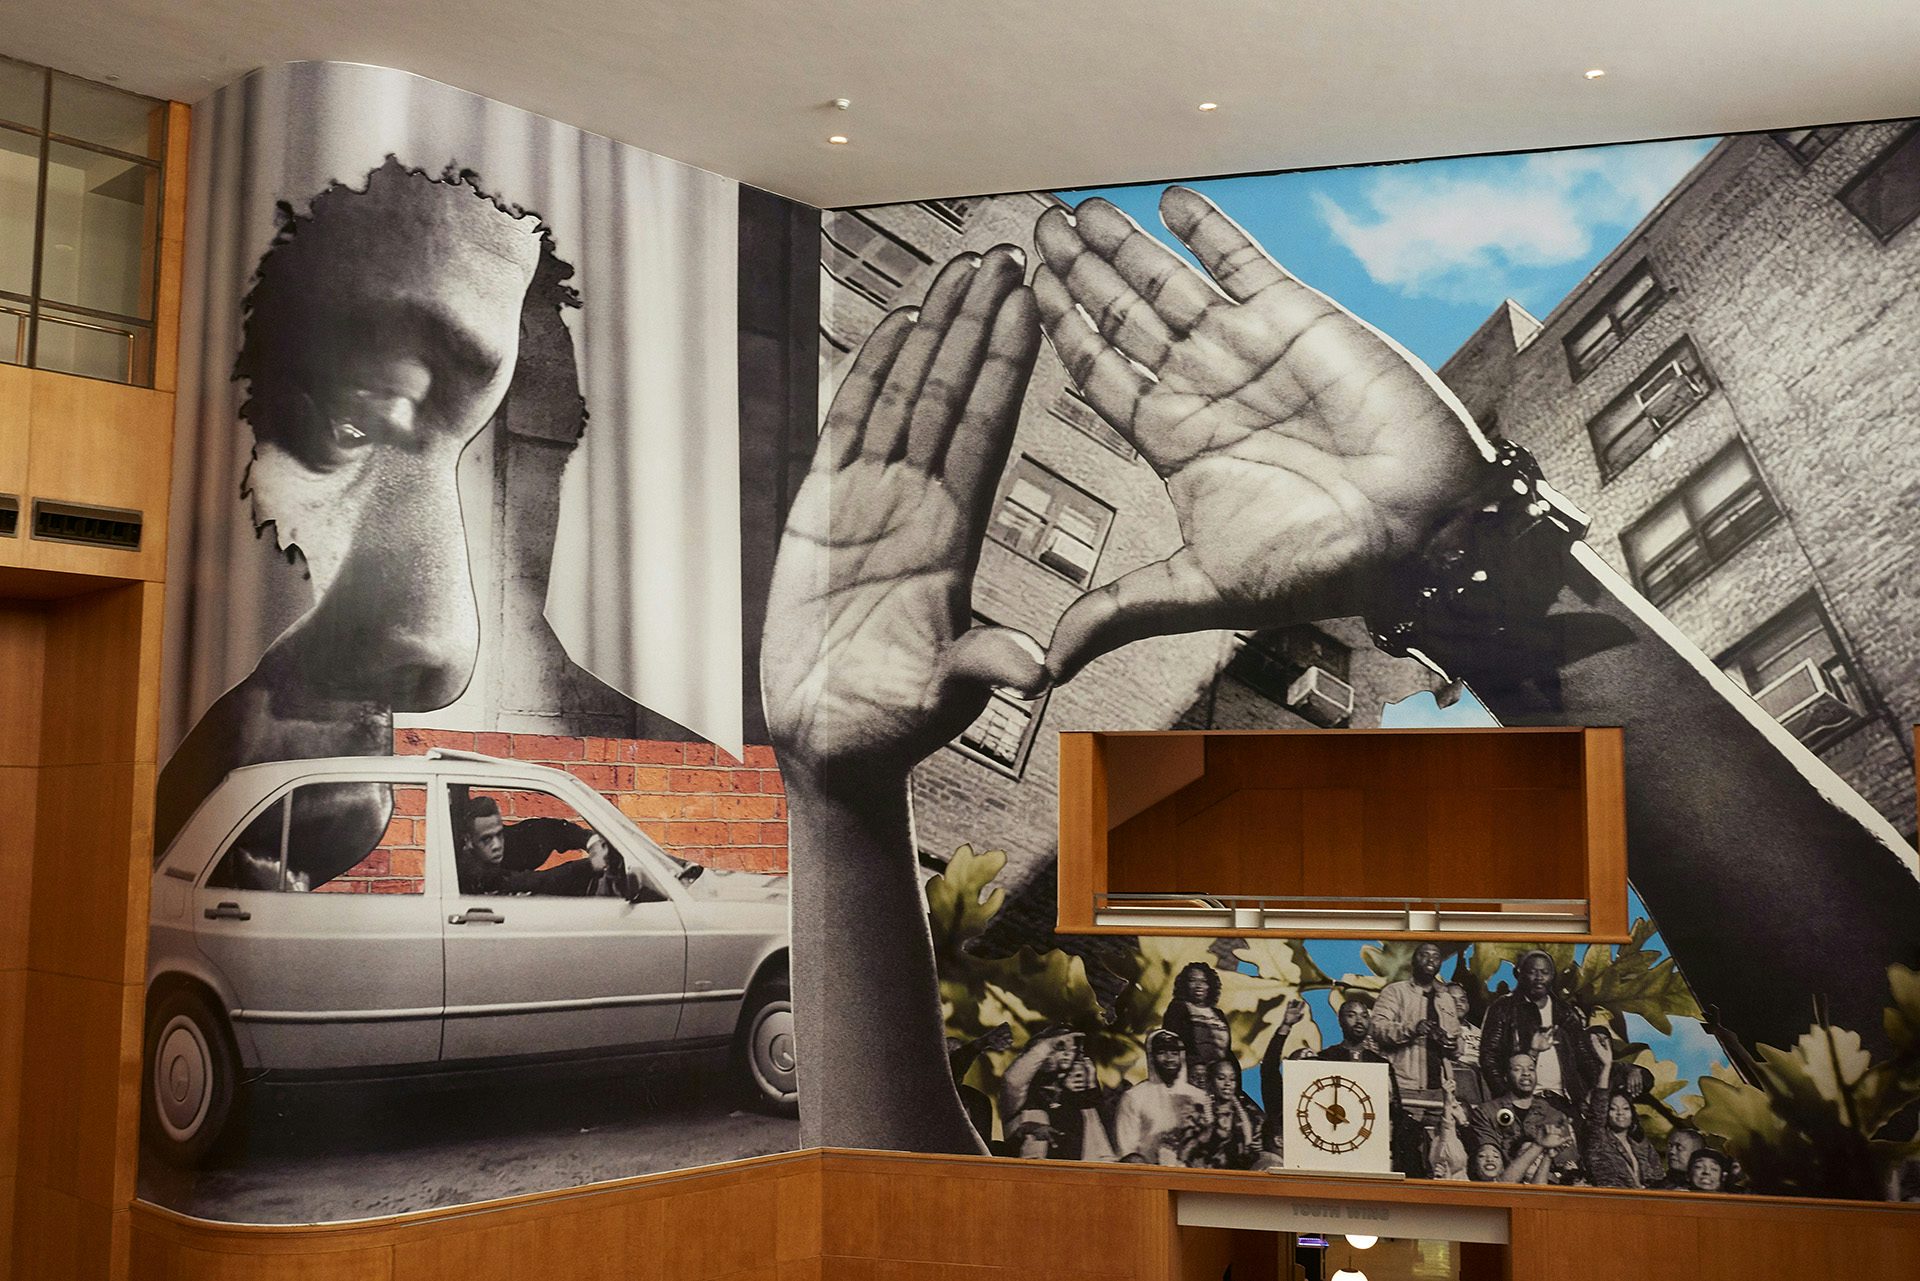 Photo of the main hall at the Brooklyn Public Library showing Jazz Grant's mural of Jay Z, including a cut-out of hands forming a shape of a triangle, a black and white portrait of the rapper, and a silver car